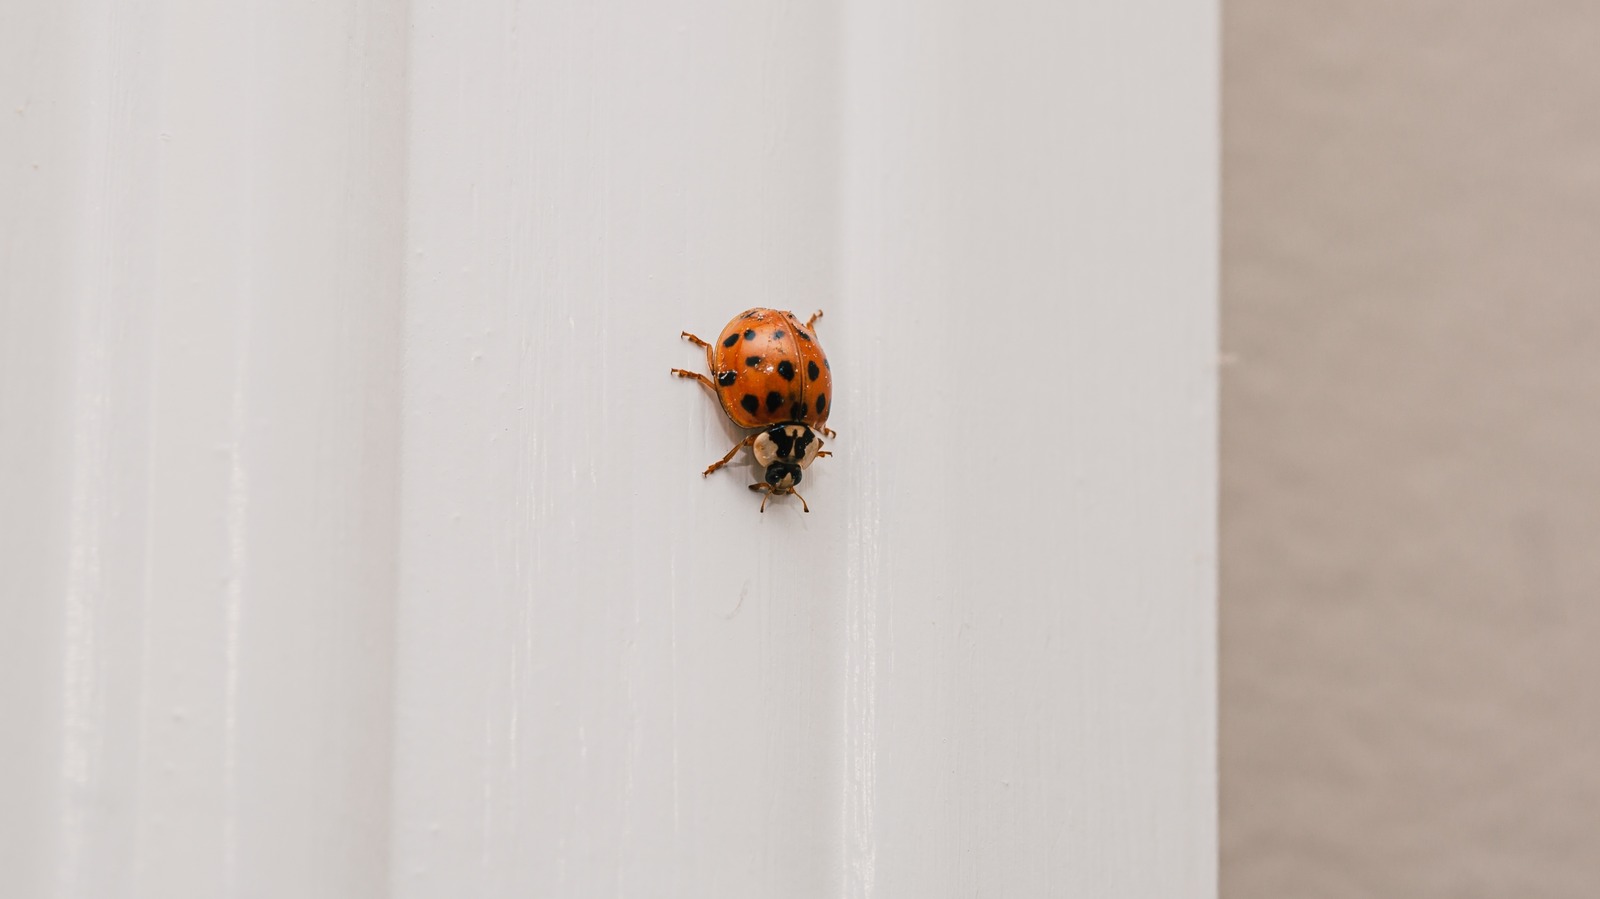 Get A Handle On Asian Lady Beetles With This Simple DIY Trap